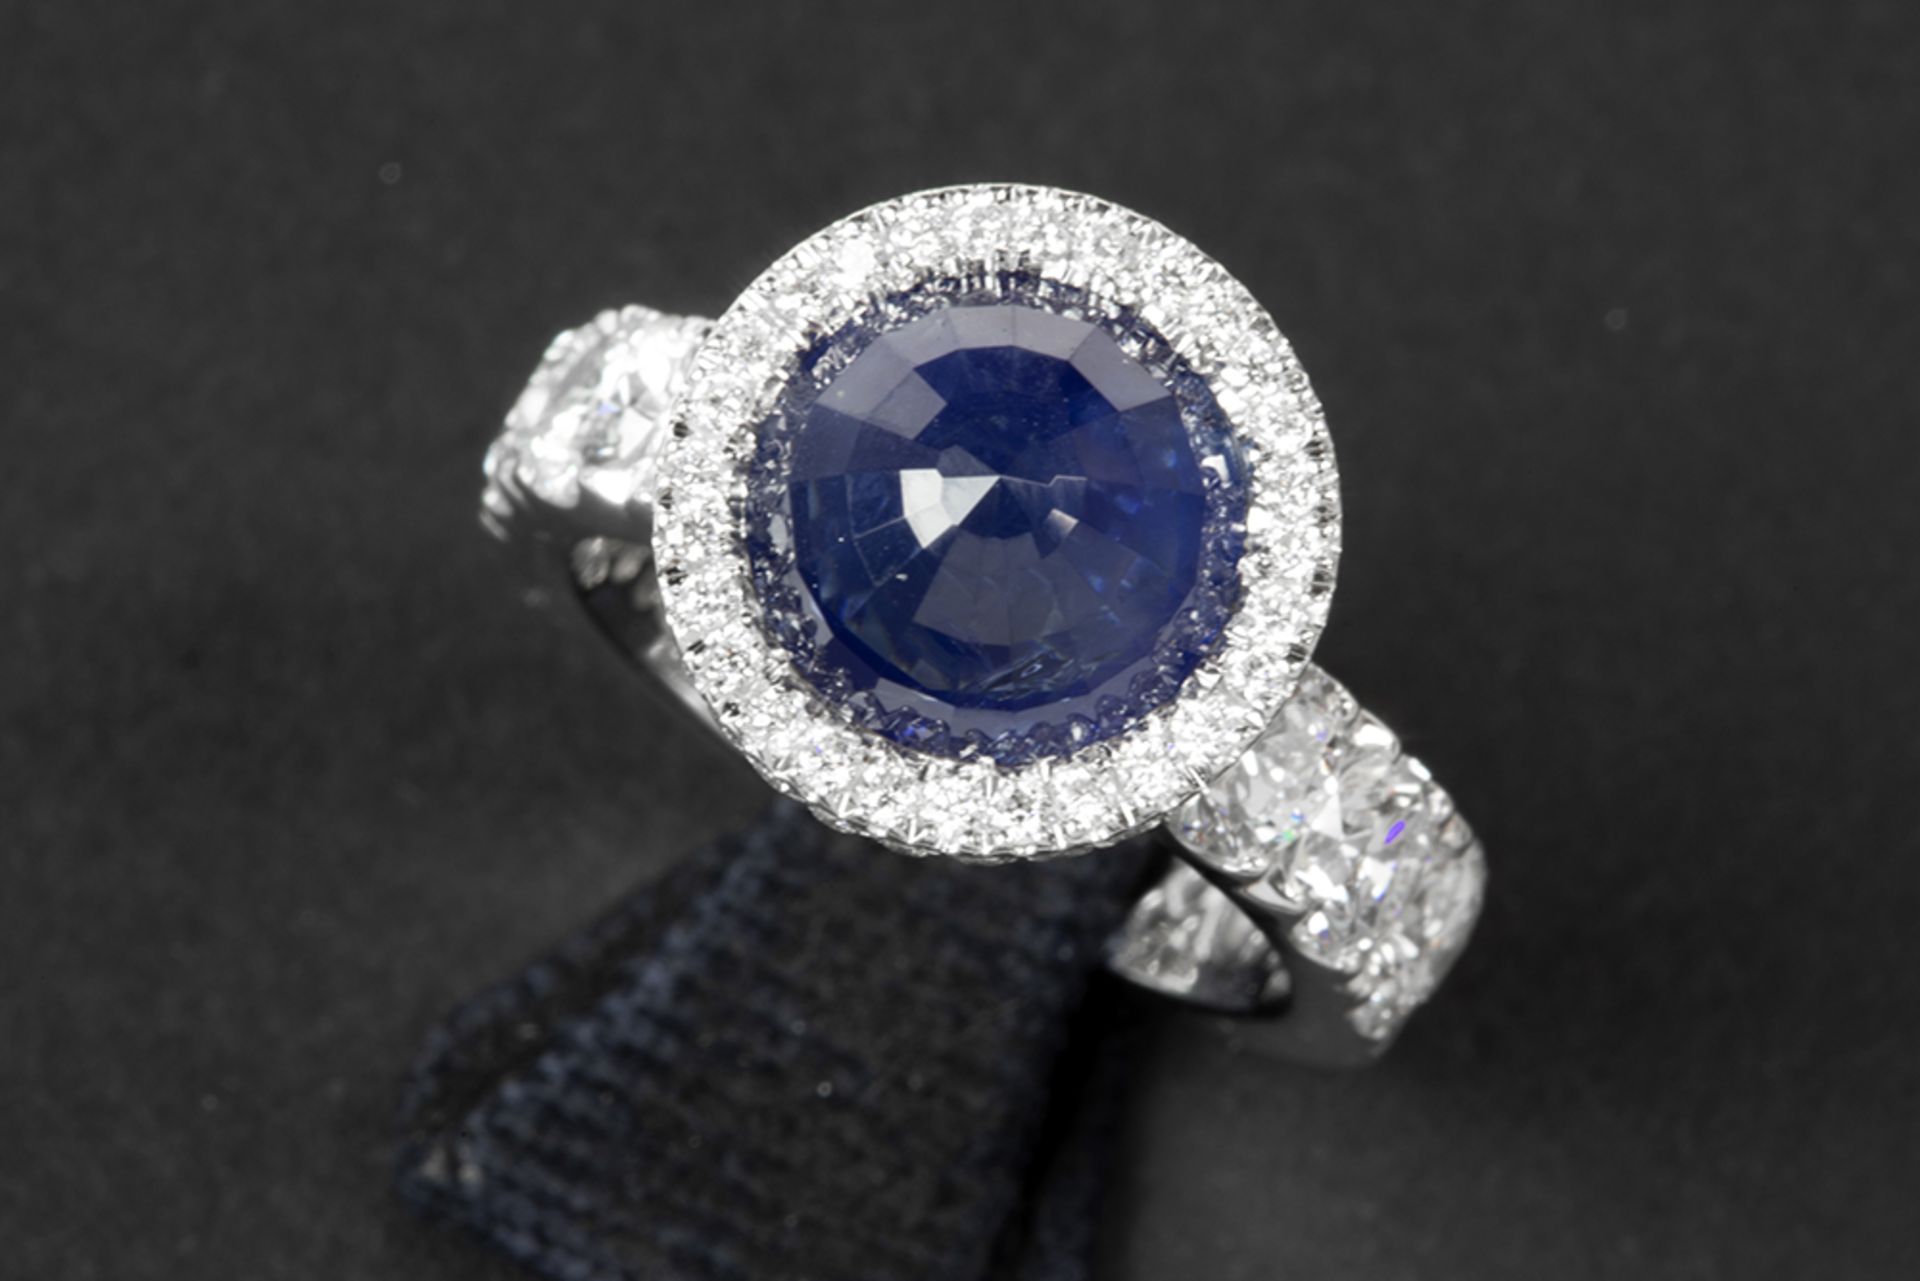 ring in white gold (18 carat) with a ca 4,30 carat Sri Lankan sapphire with special cut and ca 2,